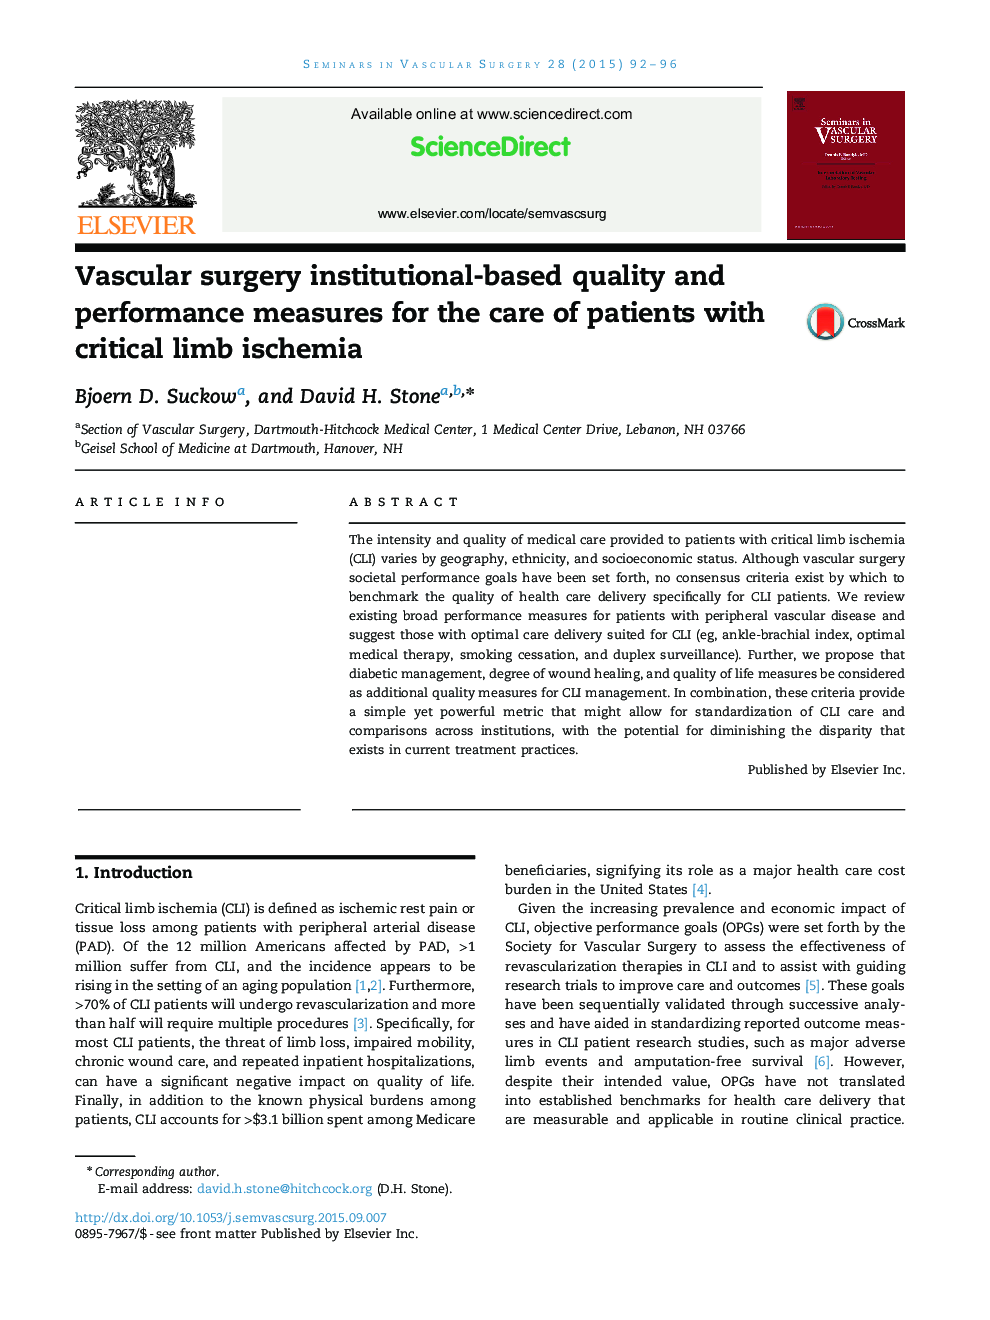 Vascular surgery institutional-based quality and performance measures for the care of patients with critical limb ischemia